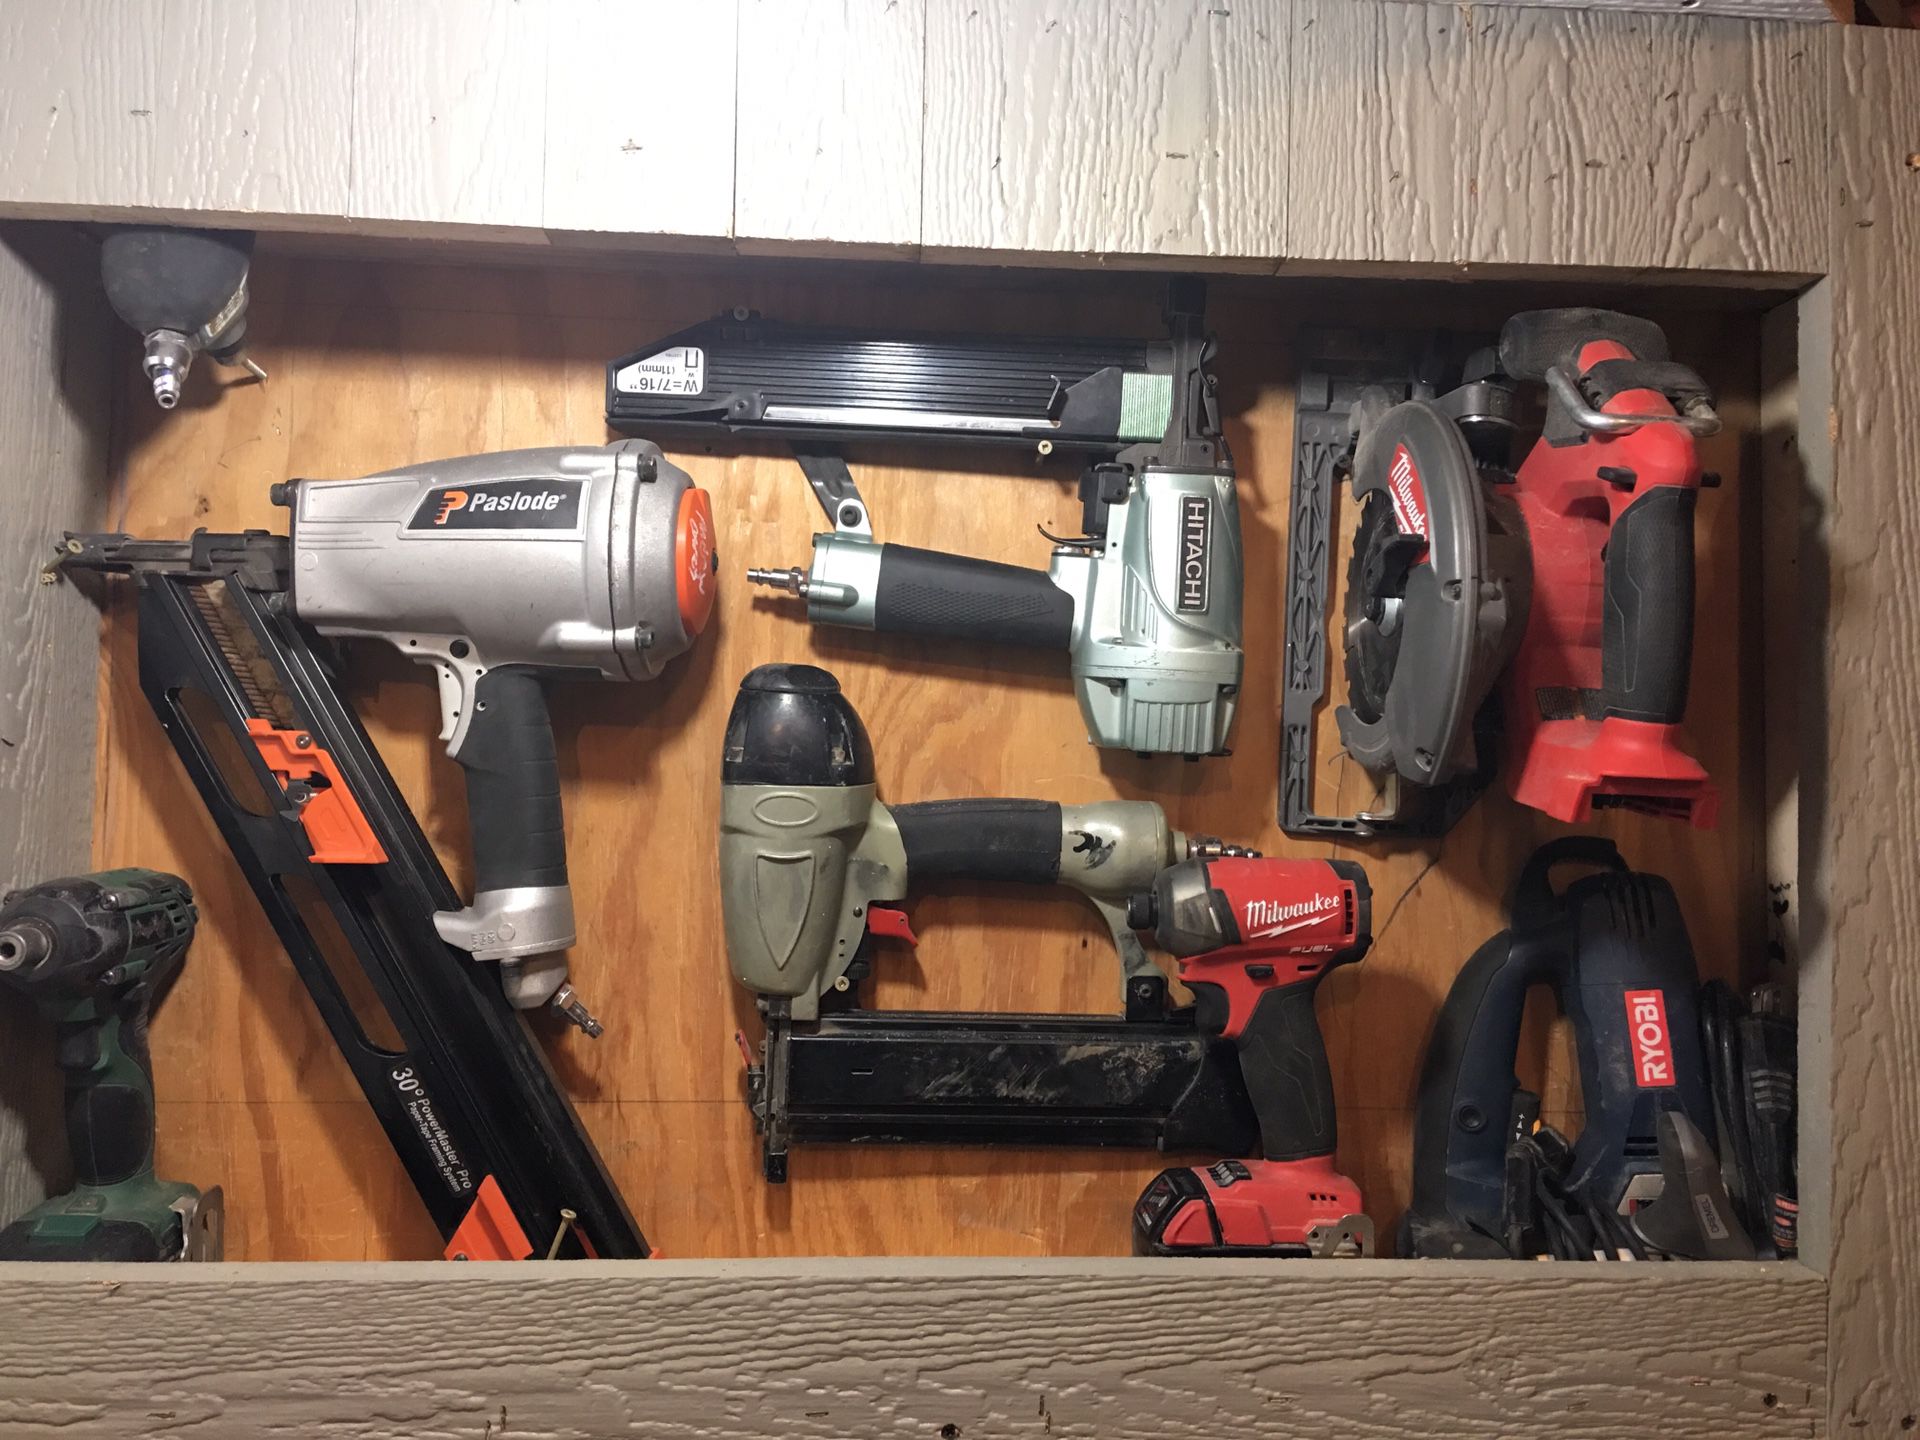 Power and Air tools